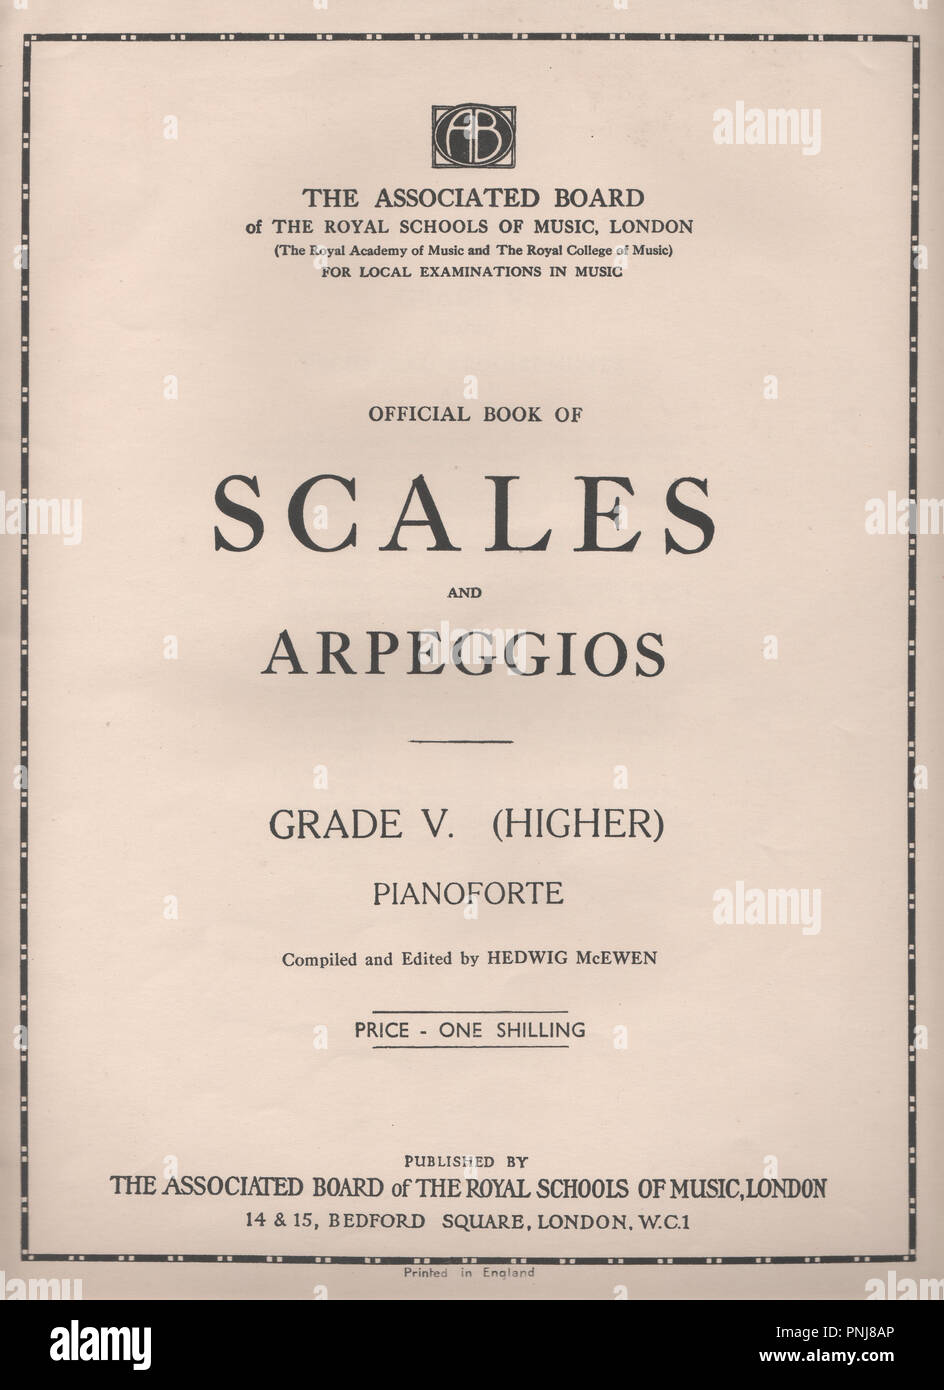 The Official Book of Scales and Arpeggios for the pianoforte published in the 1930s by the Associated Board of the Royal Schools in Music for local examinations in music. Compiled by Hedwig McEwen wife of the Scottish composer Sir John Blackwood McEwen. Stock Photo